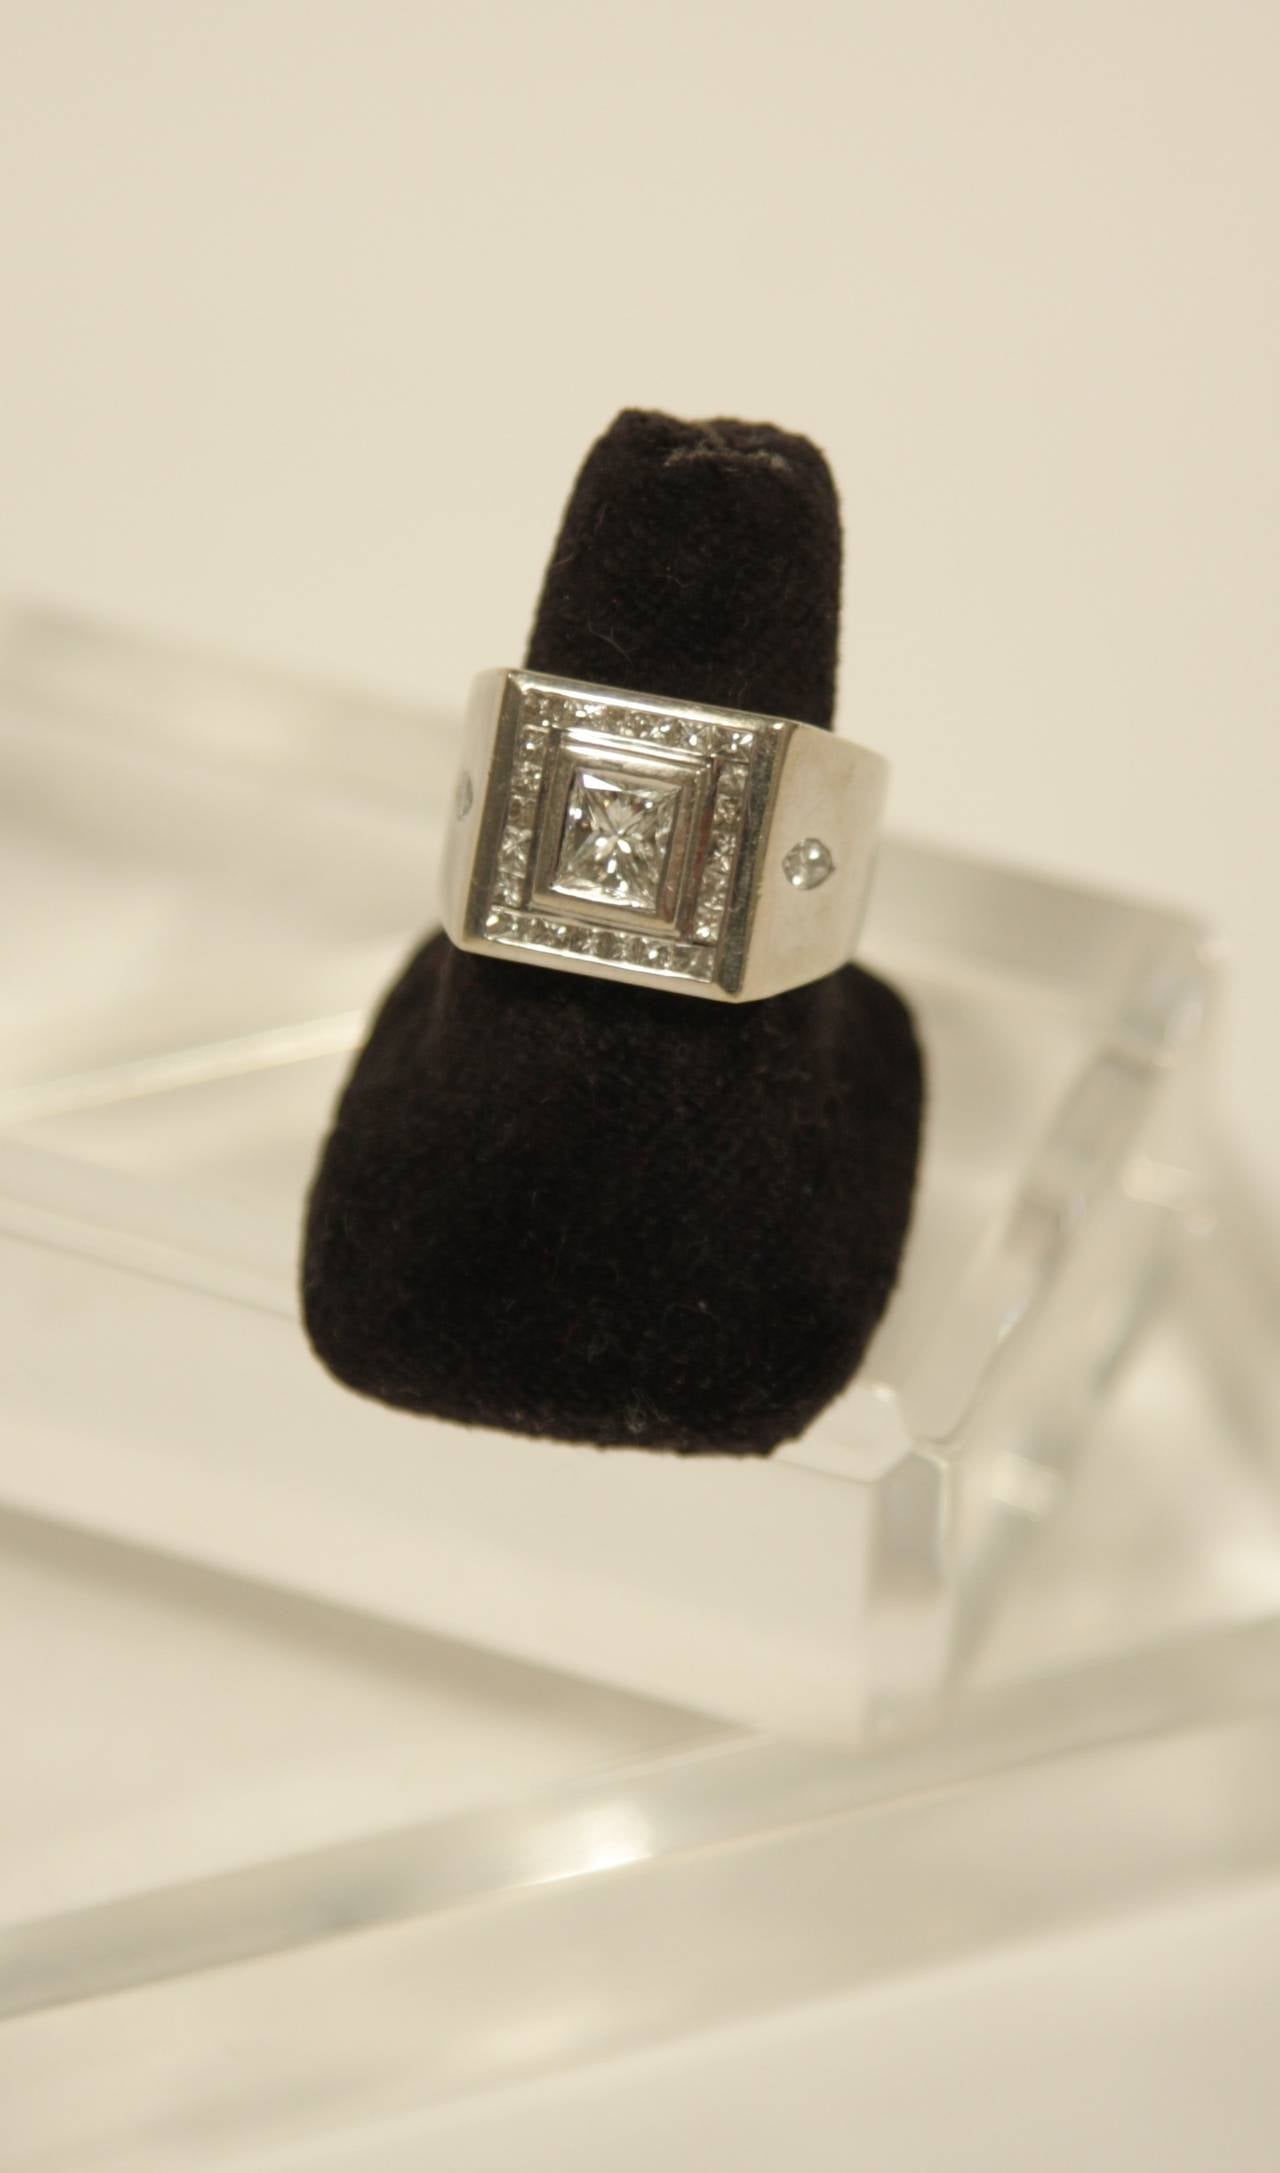 This wonderful Men's style ring is available by The Paper Bag Princess of Beverly Hills. The ring is 14K gold. The center stone is a  1.13 carat (approx.) square cut diamond, there are two side Marquise cut diamonds which weight (approximately)